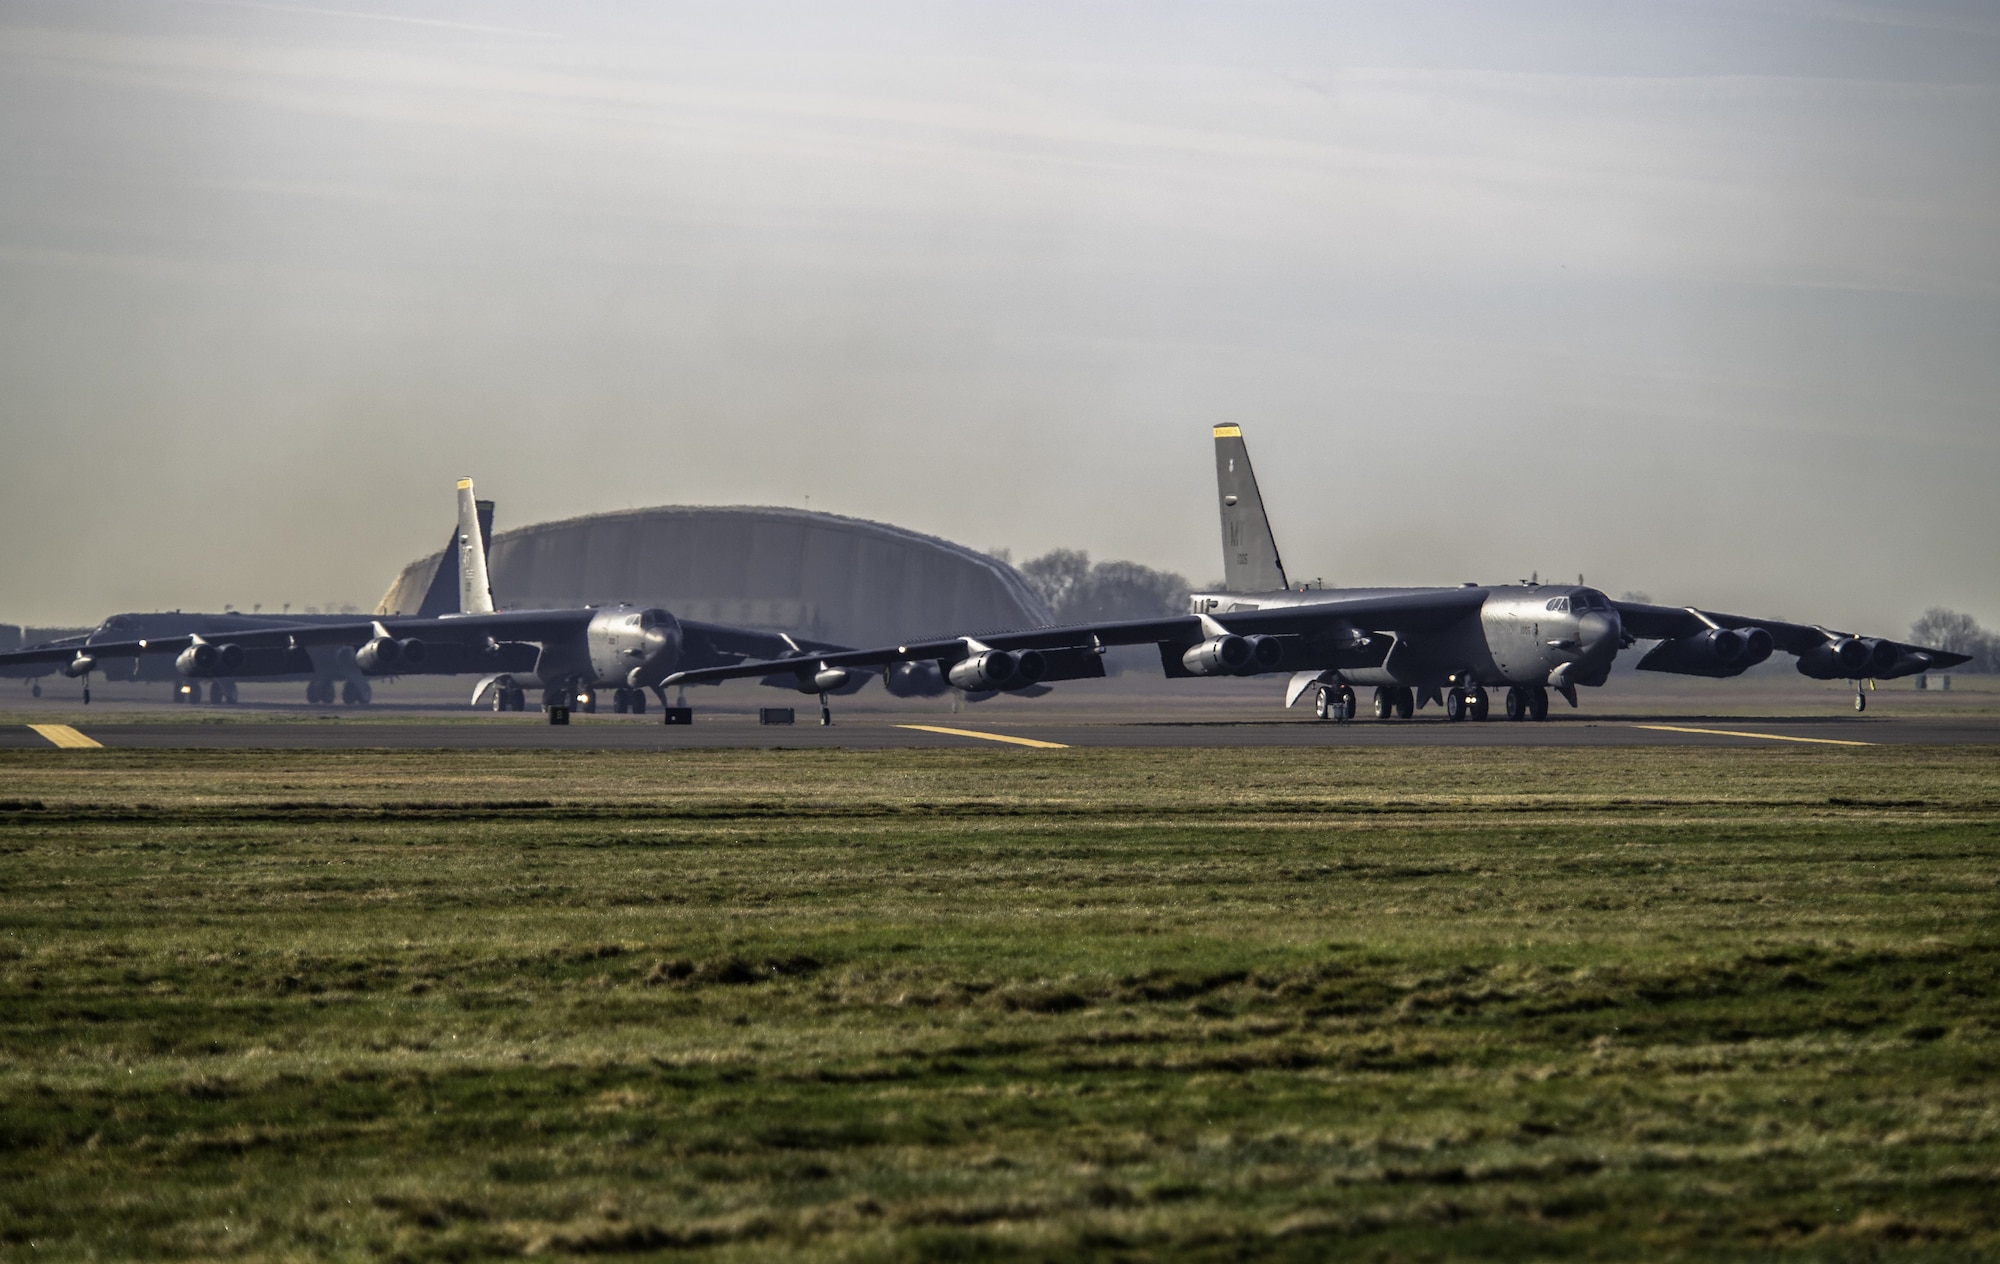 Three B-52 Stratofortress aircraft prepare to take off from RAF Fairford, England, en route to their home station at Minot Air Force Base, N.D., on Jan 30, 2018. Approximately 300 Airmen assigned to the 5th Bomb Wing deployed to the United Kingdom to conduct theater integration and flying training. (U.S. Air Force photo by Staff Sgt. Trevor T. McBride)